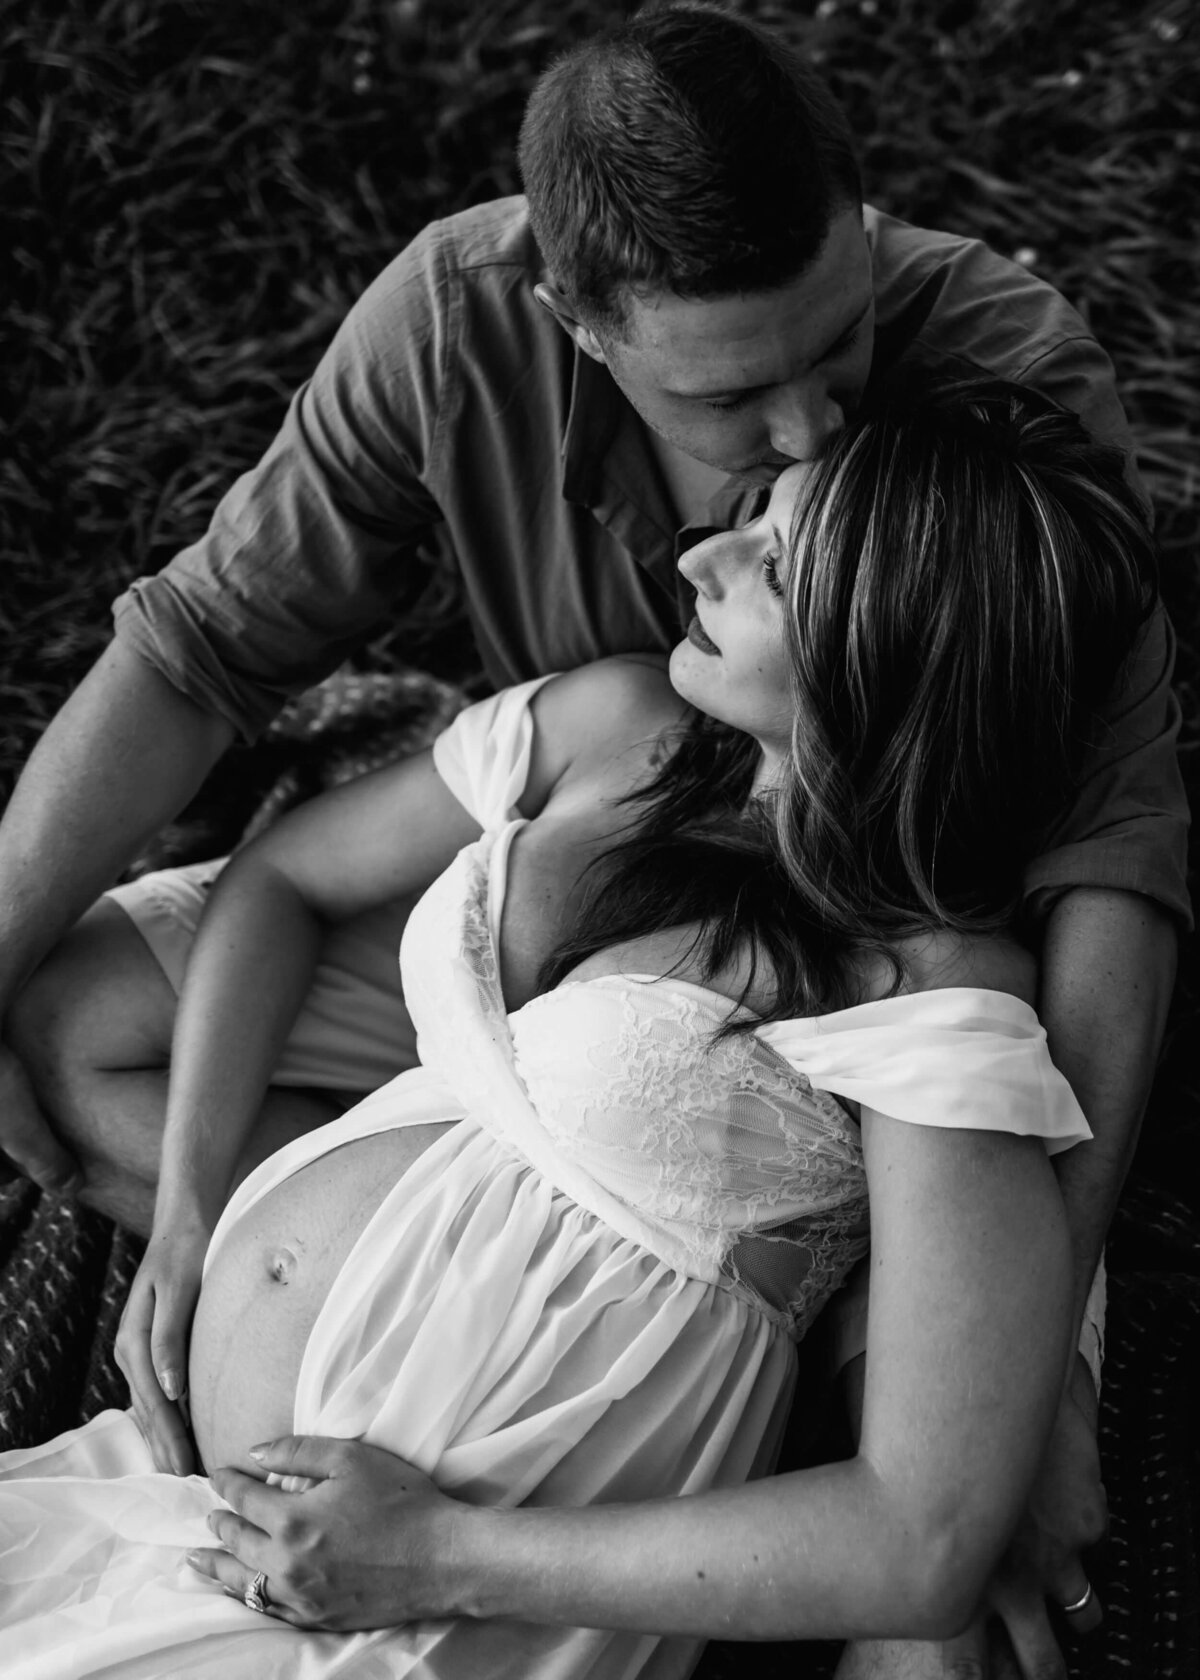 A maternity session in a grassy field captured by a Pittsburgh maternity photographer.